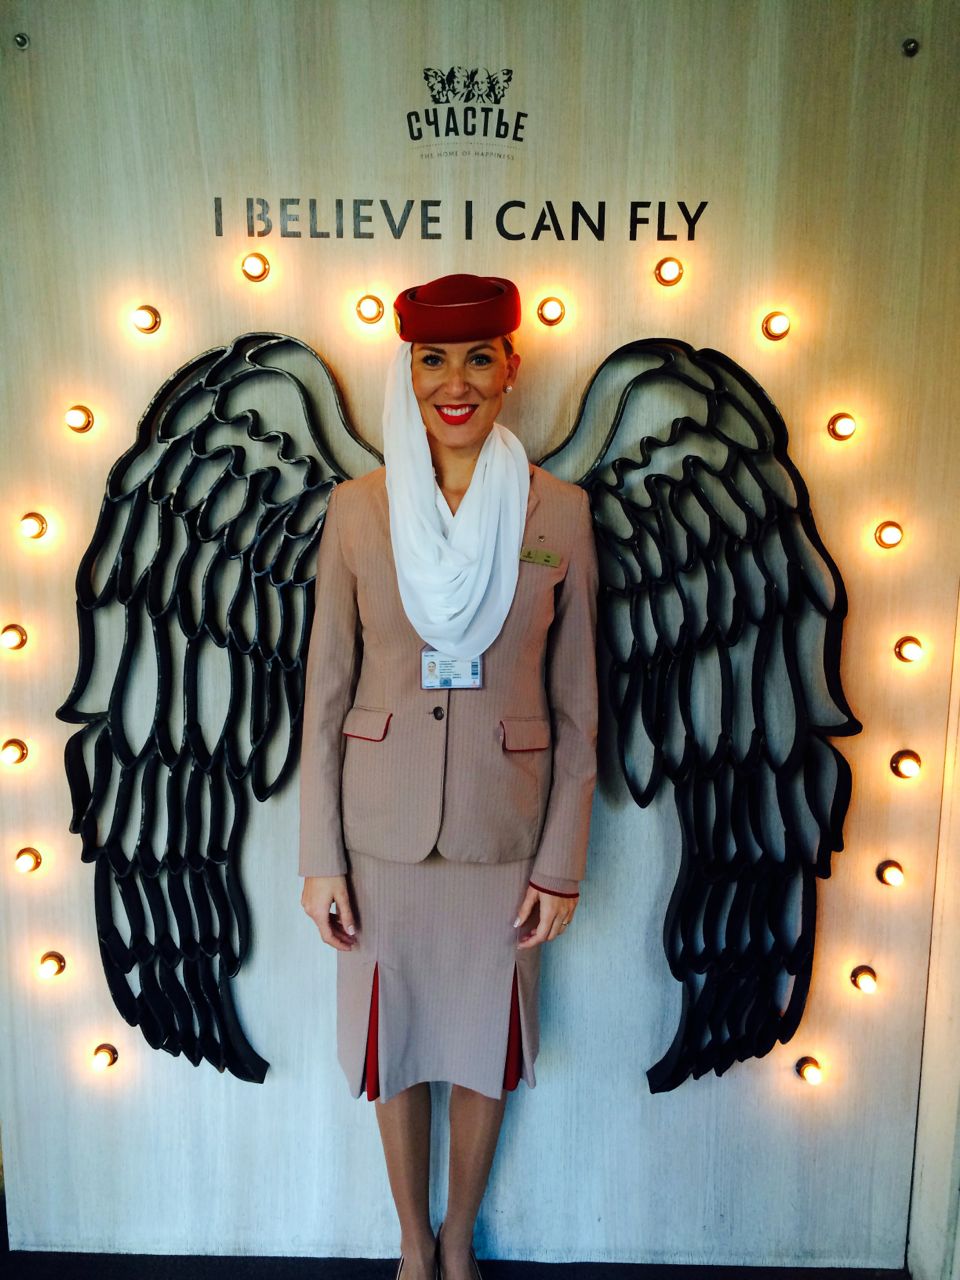 What is it like to work for Emirates airline? A flight attendant tells her story